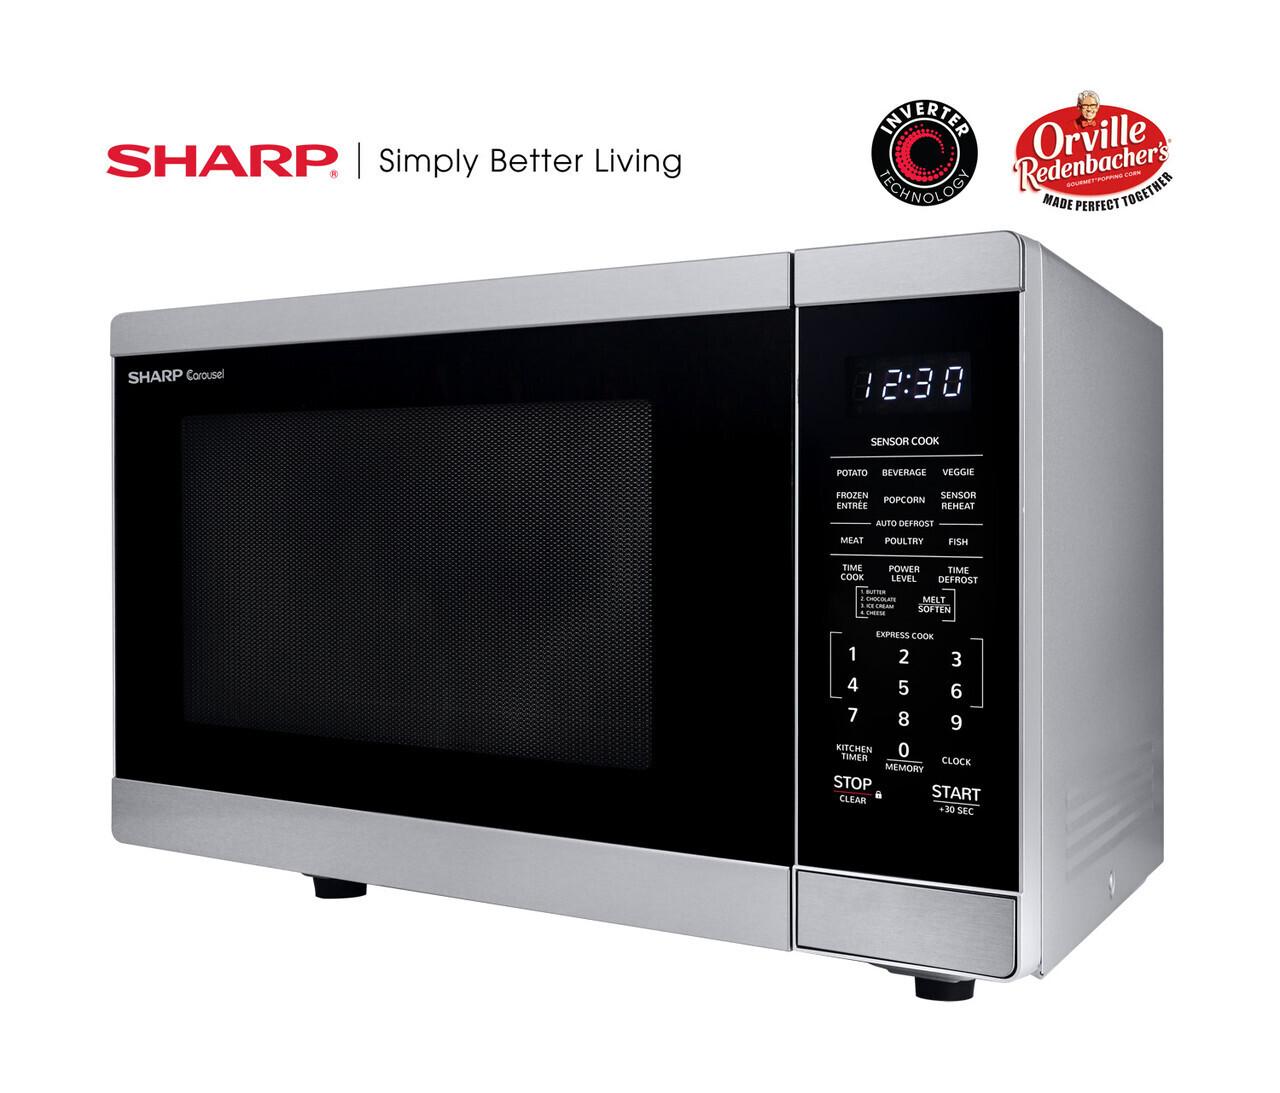 Sharp 1.4 cu. ft. Family-Size Countertop Microwave Oven with Inverter Technology